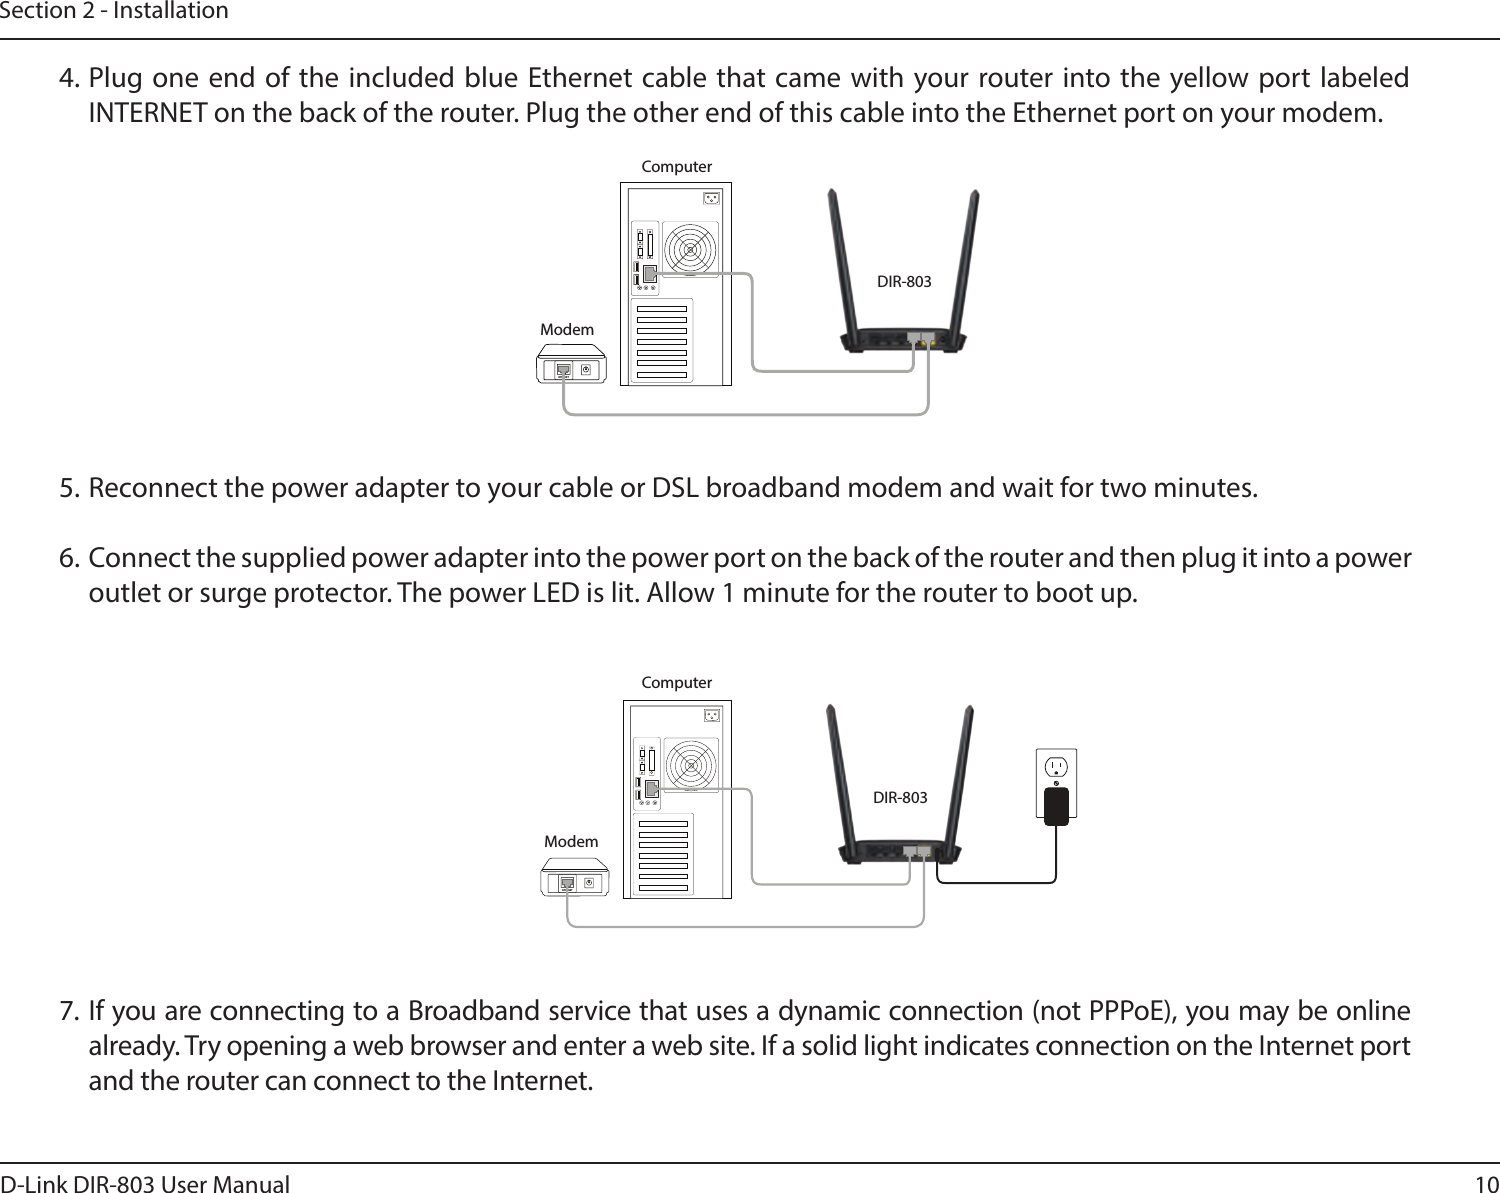 10D-Link DIR-803 User ManualSection 2 - Installation4. Plug one end of the included blue Ethernet cable that came with your router into the yellow port labeled INTERNET on the back of the router. Plug the other end of this cable into the Ethernet port on your modem.5. Reconnect the power adapter to your cable or DSL broadband modem and wait for two minutes.6.  Connect the supplied power adapter into the power port on the back of the router and then plug it into a power outlet or surge protector. The power LED is lit. Allow 1 minute for the router to boot up. 7. If you are connecting to a Broadband service that uses a dynamic connection (not PPPoE), you may be online already. Try opening a web browser and enter a web site. If a solid light indicates connection on the Internet port and the router can connect to the Internet. DIR-803DIR-803ModemModemComputerComputerINTERNETINTERNET